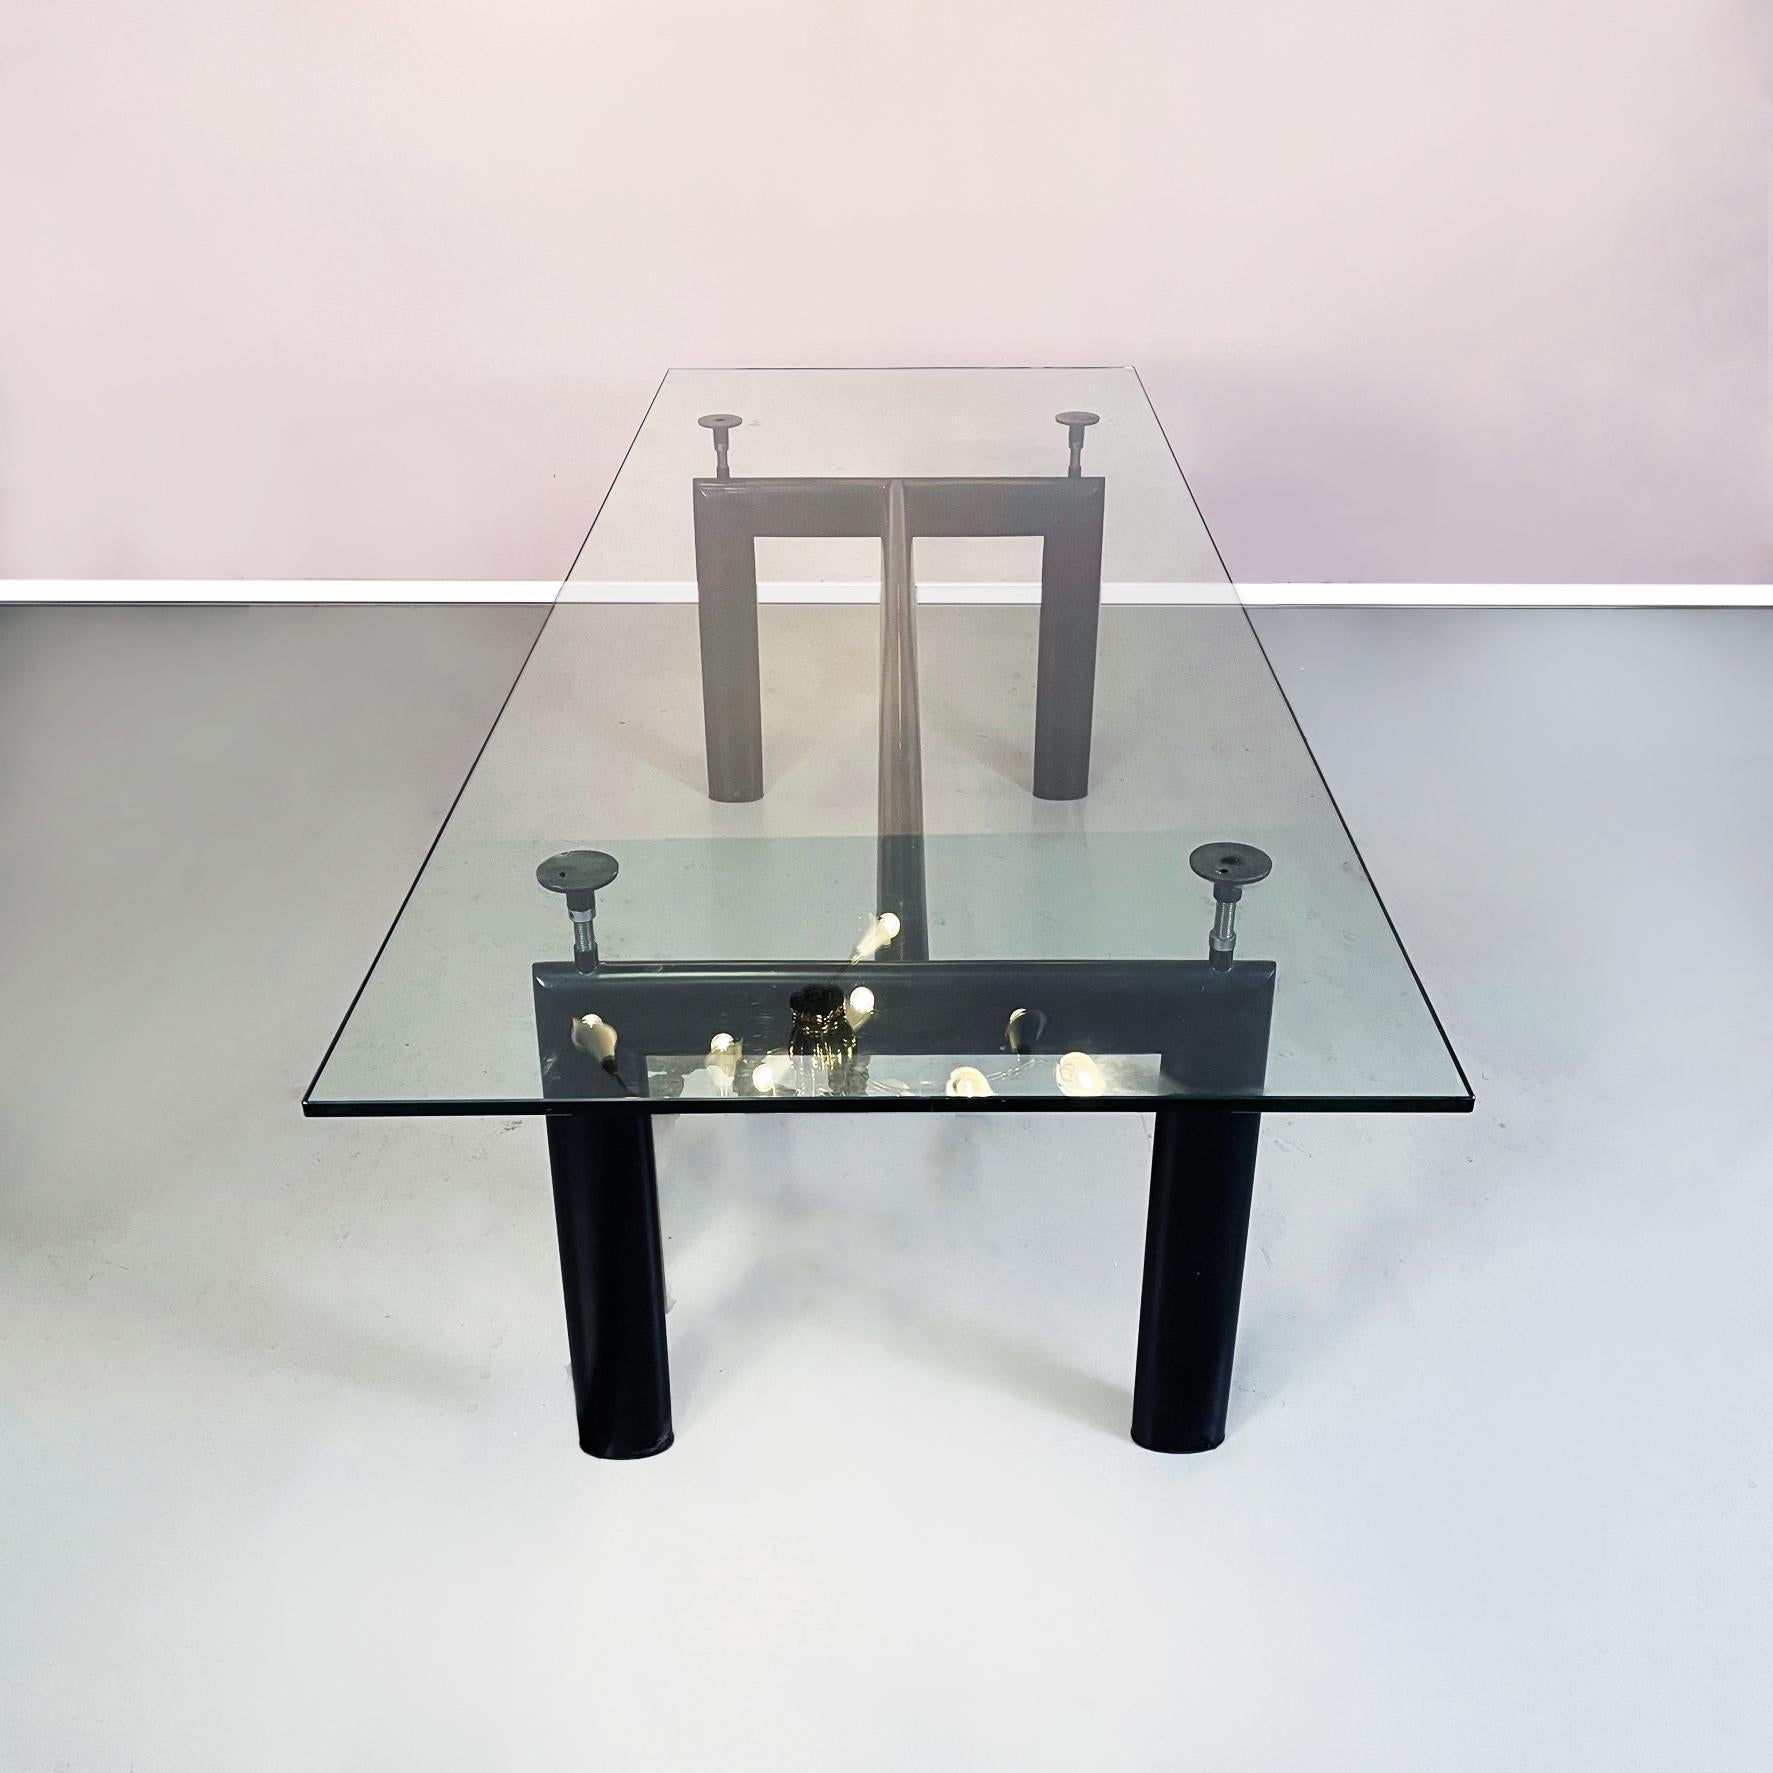 Painted Italian Mid-Century LC6 Table Le Corbusier, Jeanneret, Perriand Cassina, 1980s